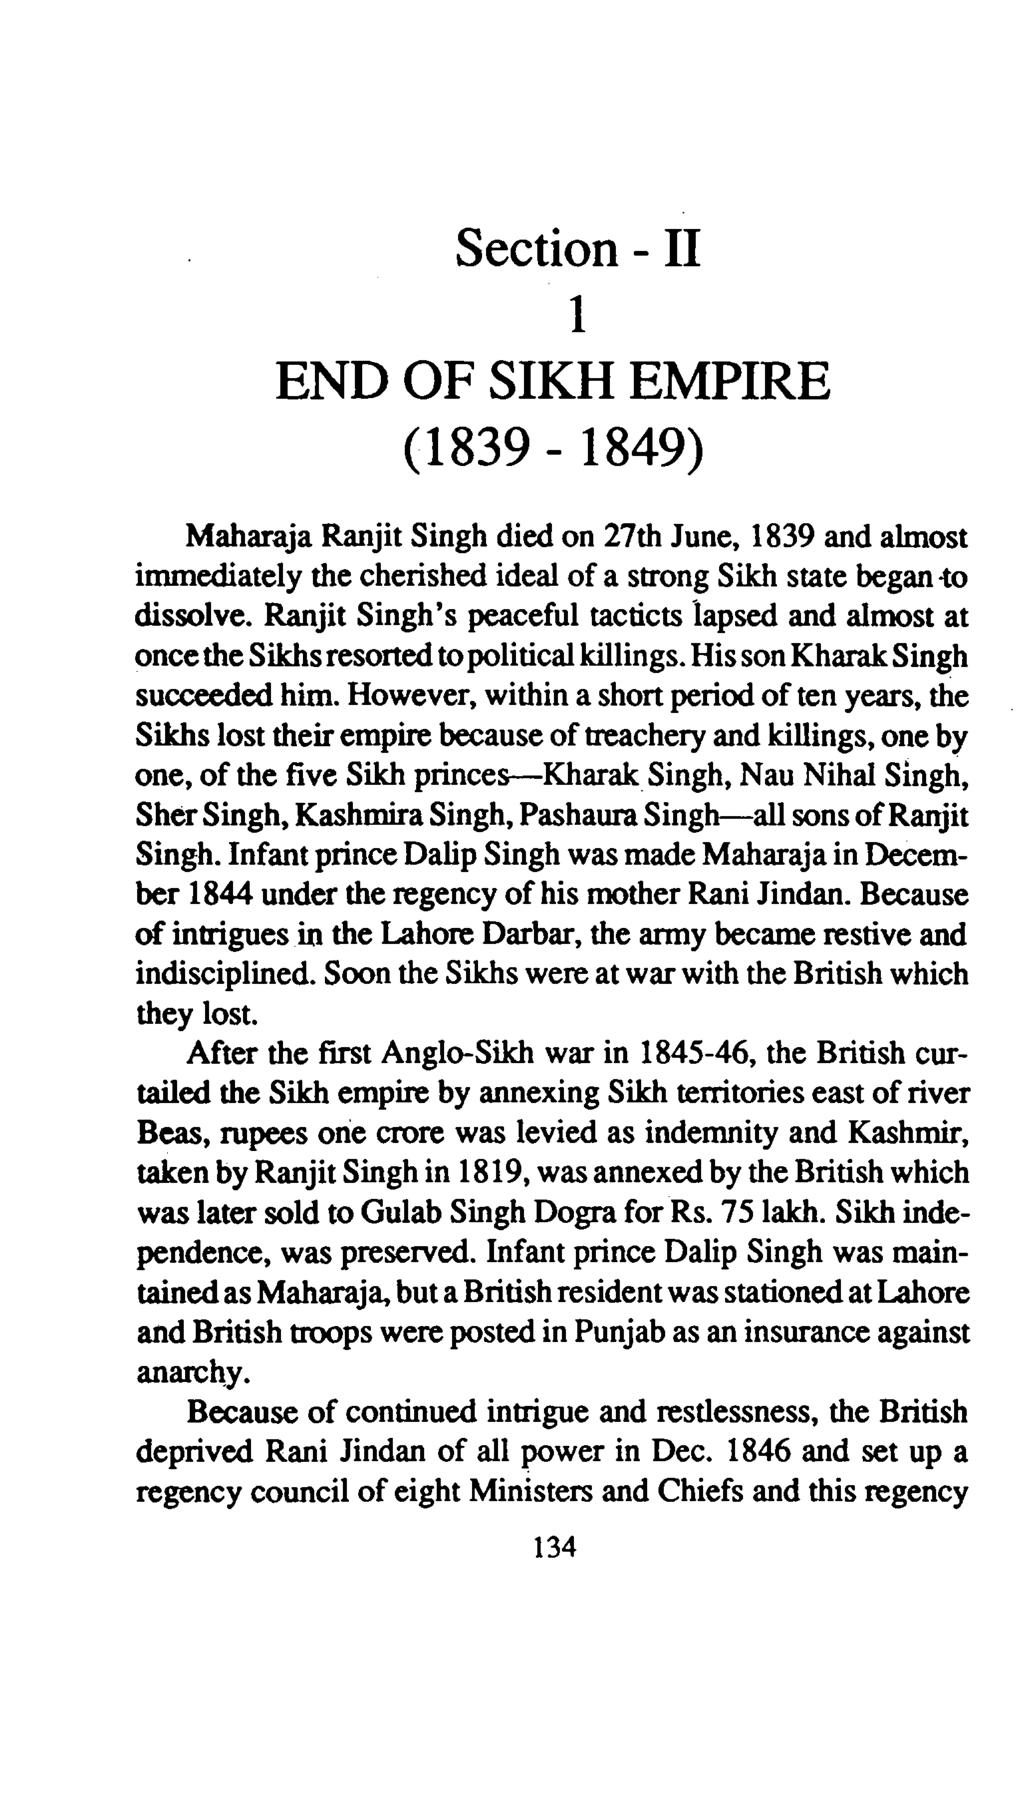 Section - II 1 END OF SIKH EMPIRE (1839-1849) Maharaja Ranjit Singh died on 27th June, 1839 and almost immediately the cherished ideal of a strong Sikh state began-to dissolve.